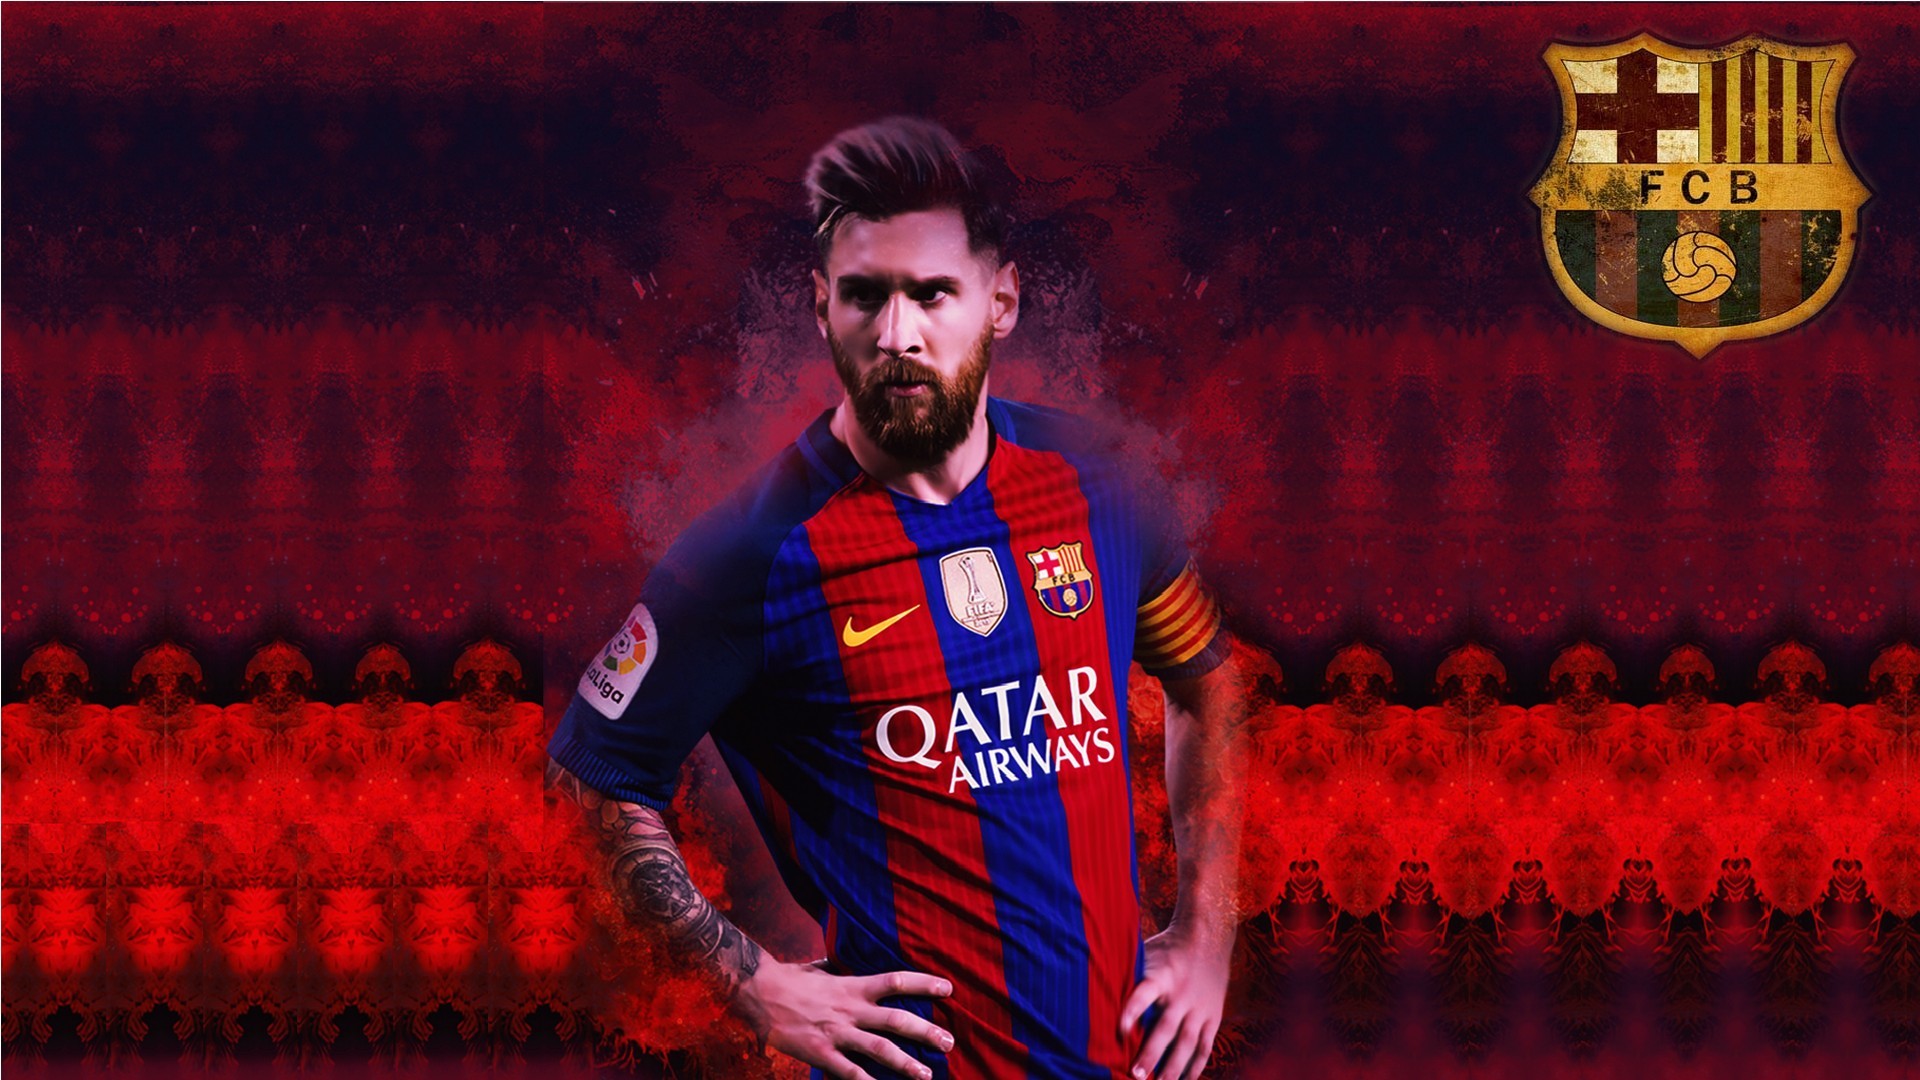 Wallpaper Desktop Lionel Messi Barcelona HD With Resolution 1920X1080 pixel. You can make this wallpaper for your Mac or Windows Desktop Background, iPhone, Android or Tablet and another Smartphone device for free